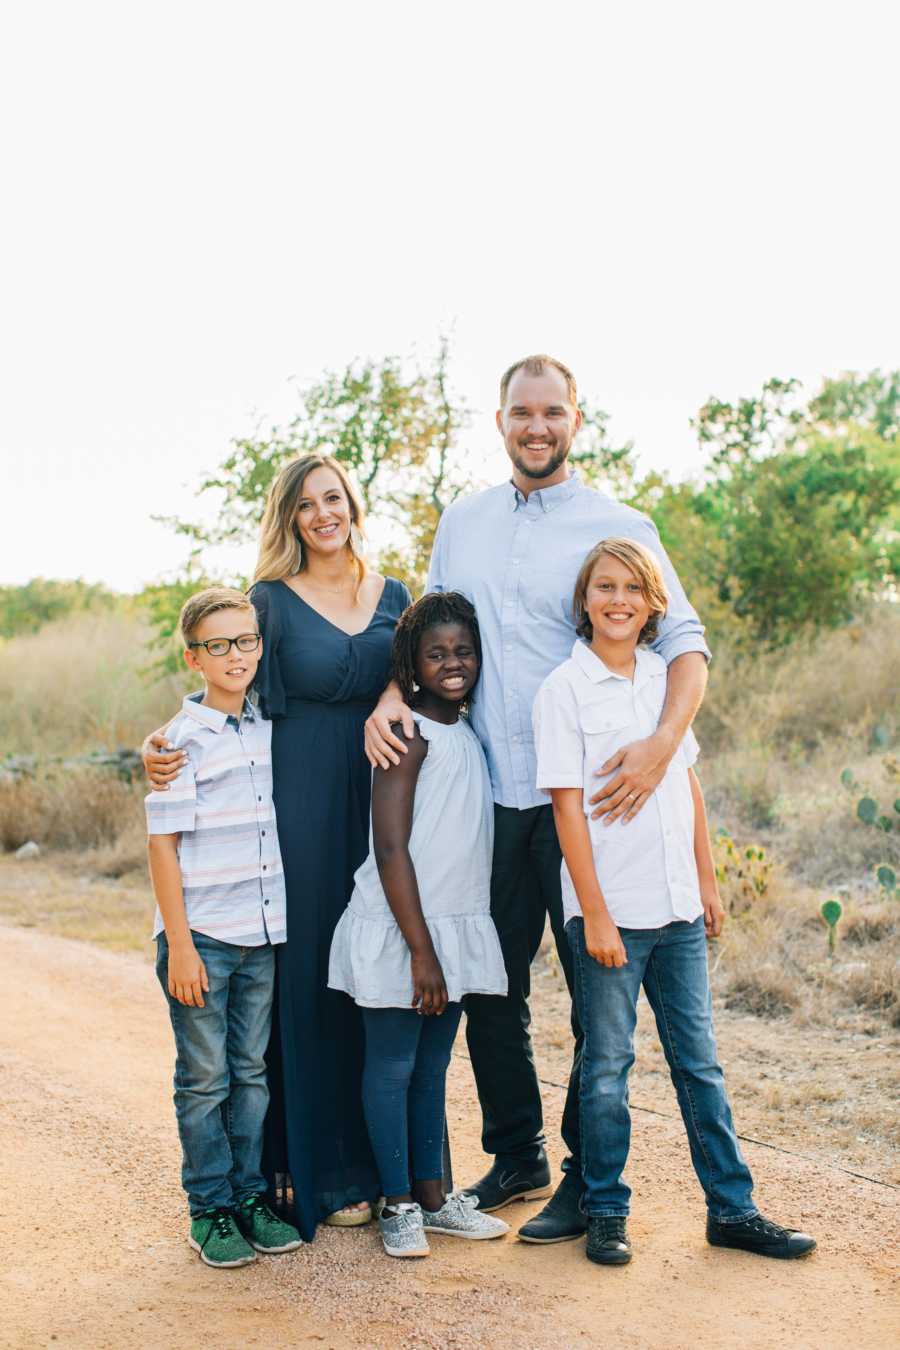 Husband and wife stand on dirt path outside with two sons and adopted daughter